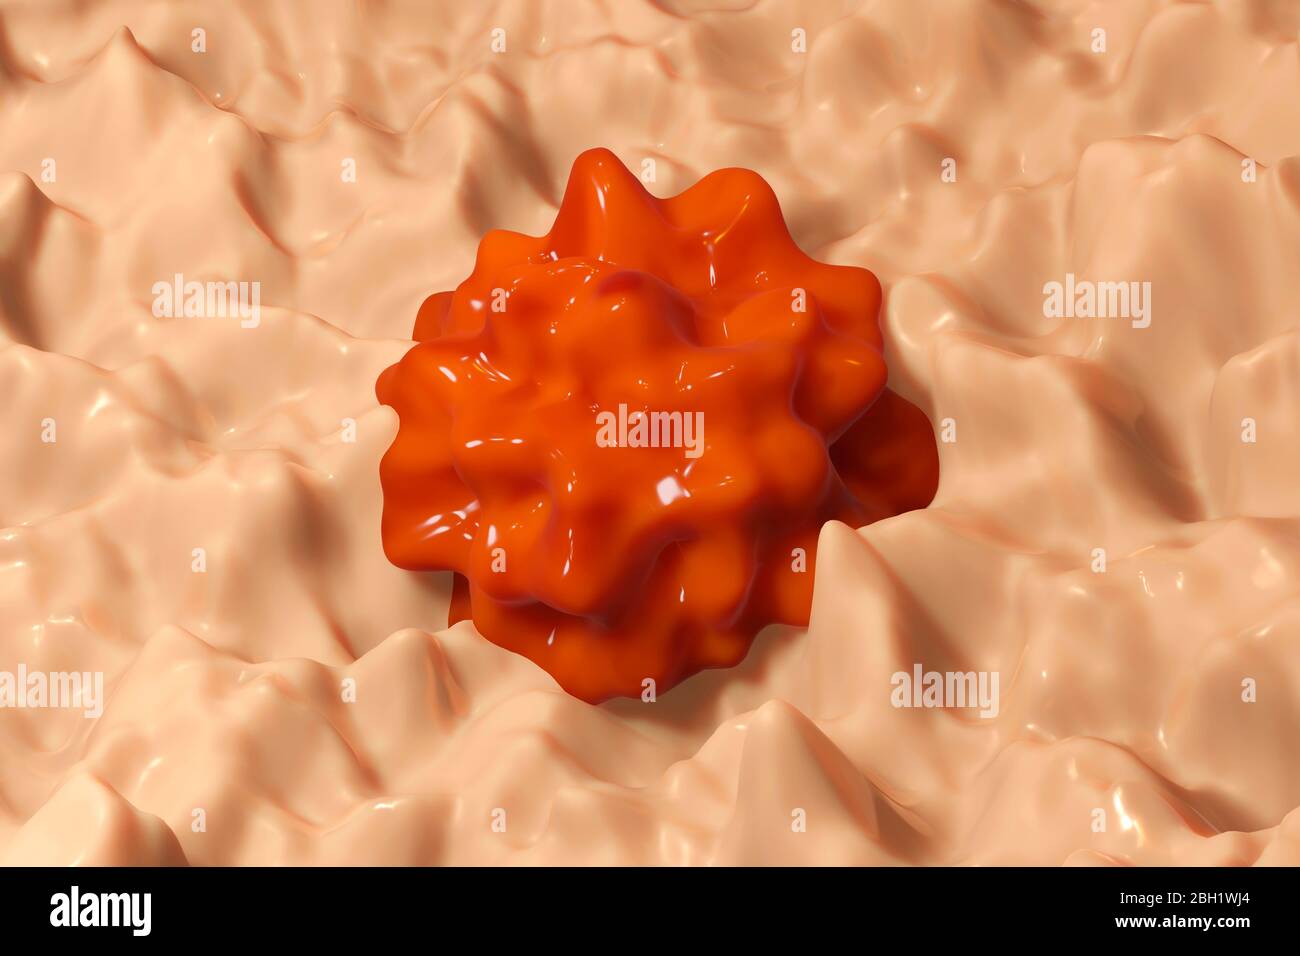 Three dimensional render of polyp growing on healthy tissue Stock Photo